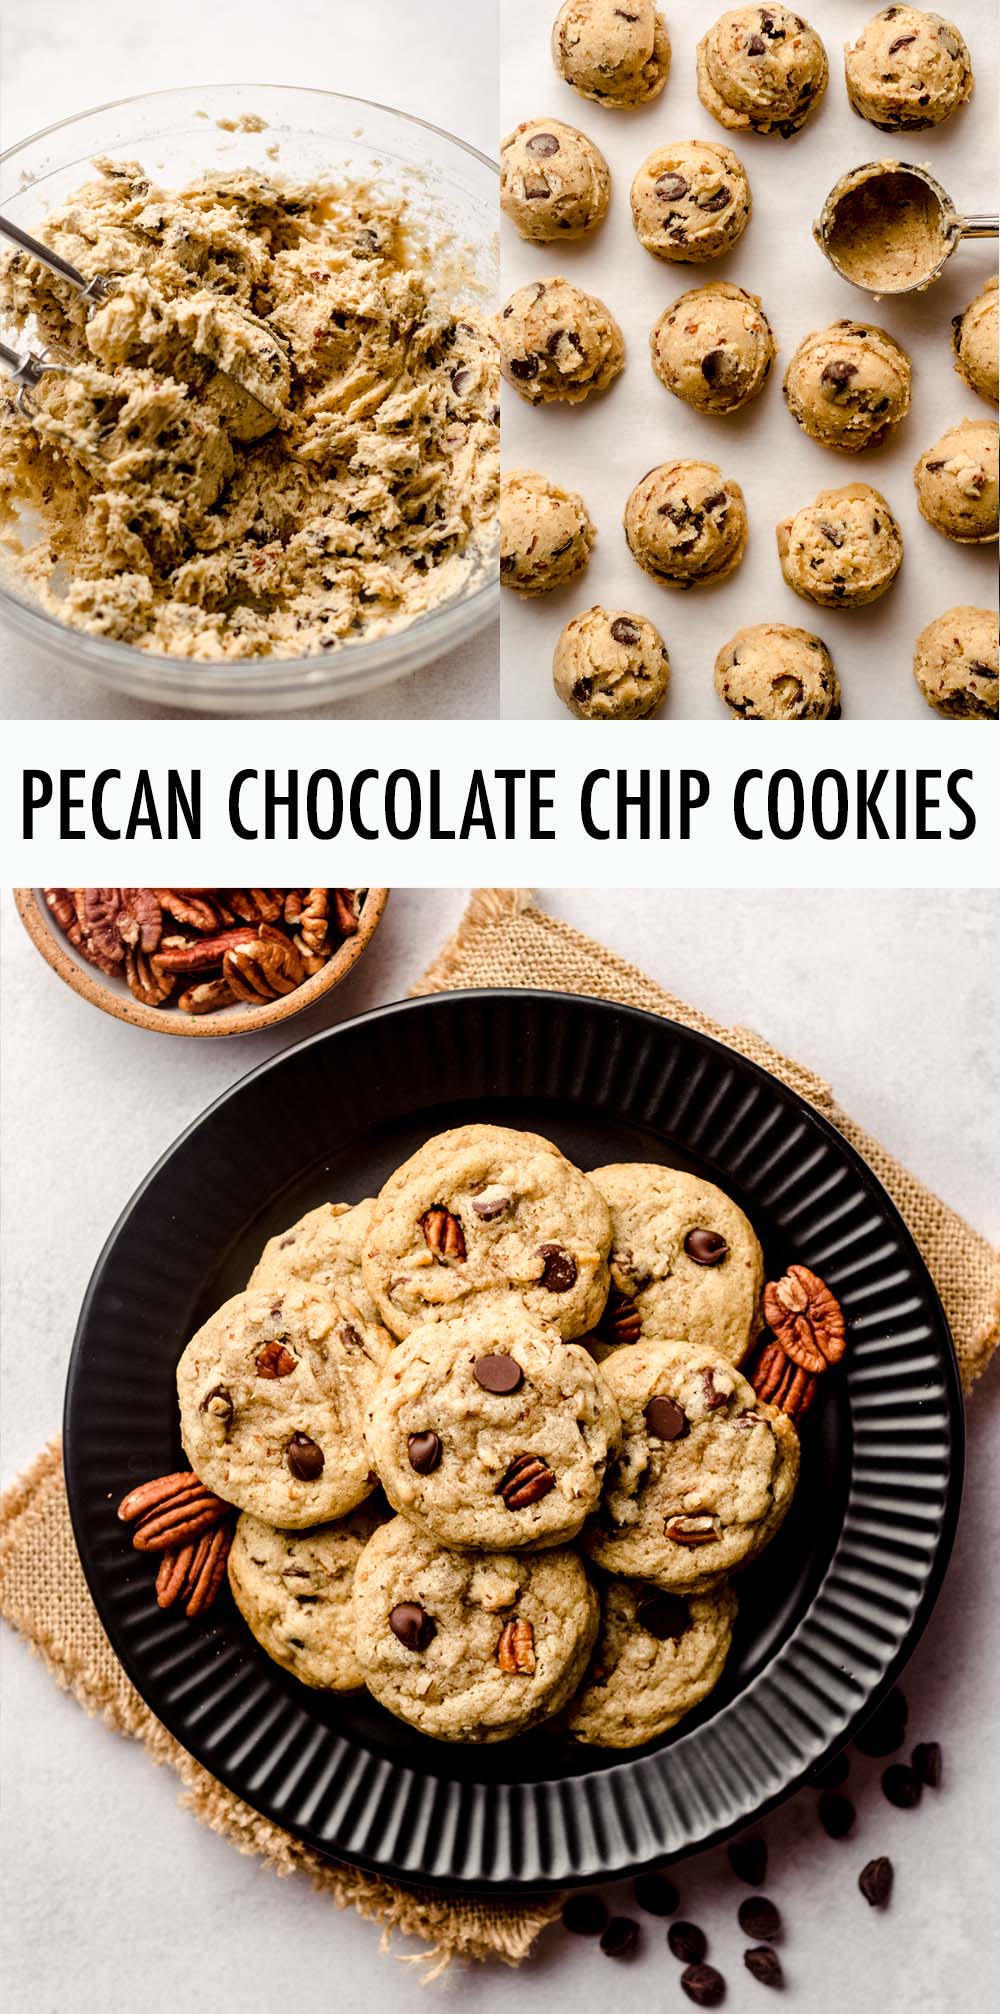 The classic chocolate chip cookie gets an upgrade with this soft, warm, and gooey version including the addition of crispy pecans. Pecan chocolate chip cookies are sure to become a new favorite in your home. via @frshaprilflours